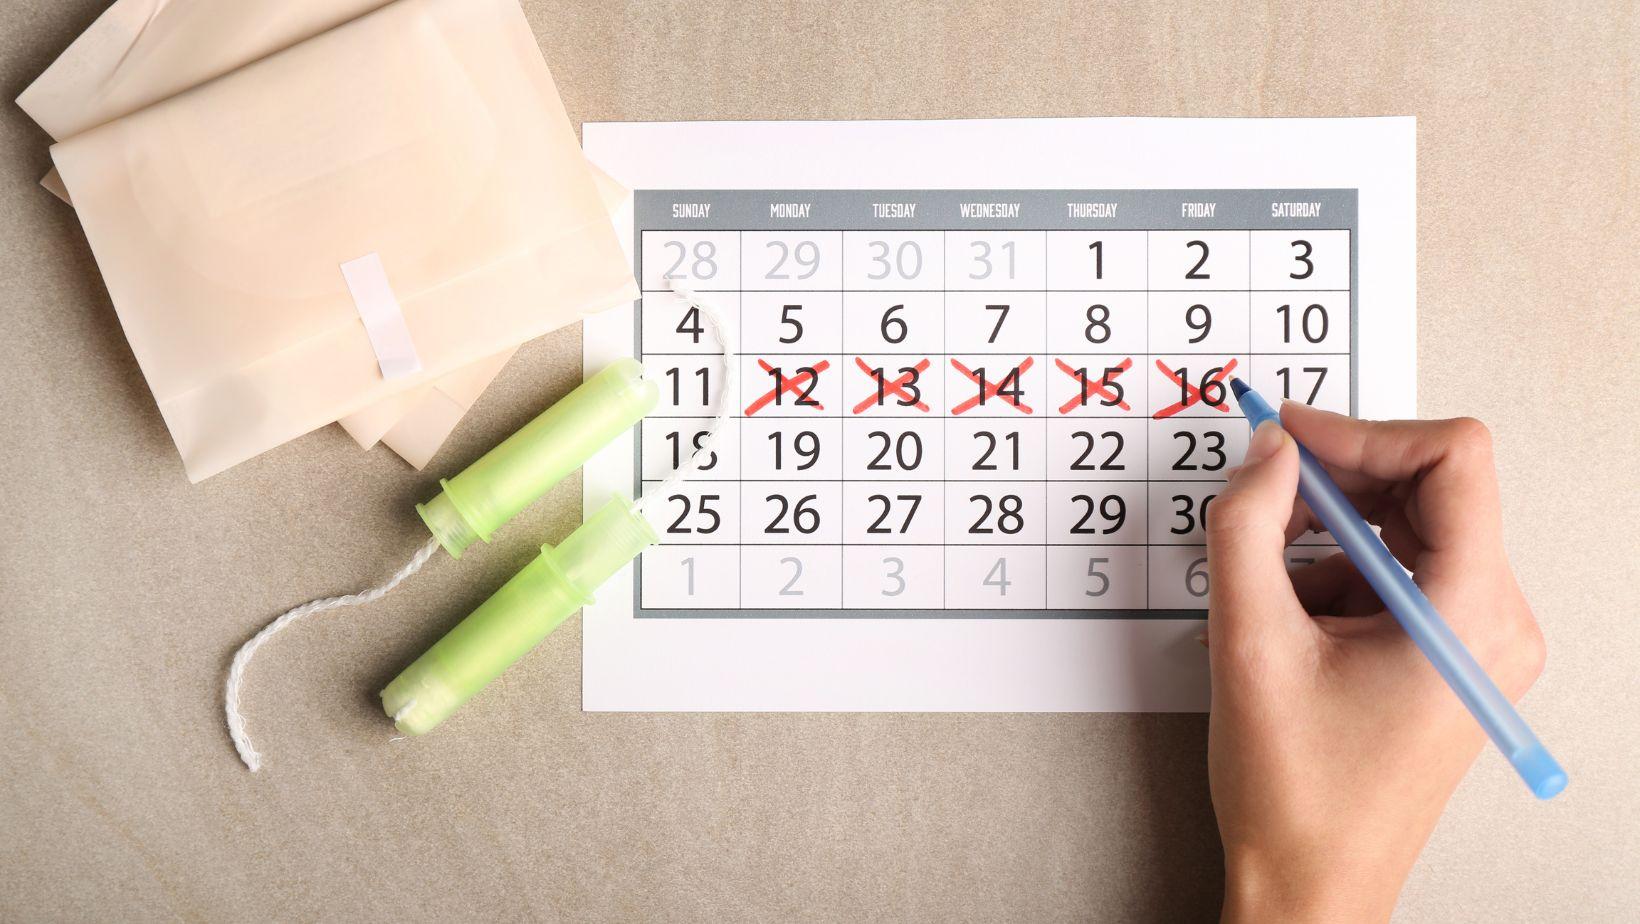 How to Safely Delay Your Period for a Stress-Free Vacation?